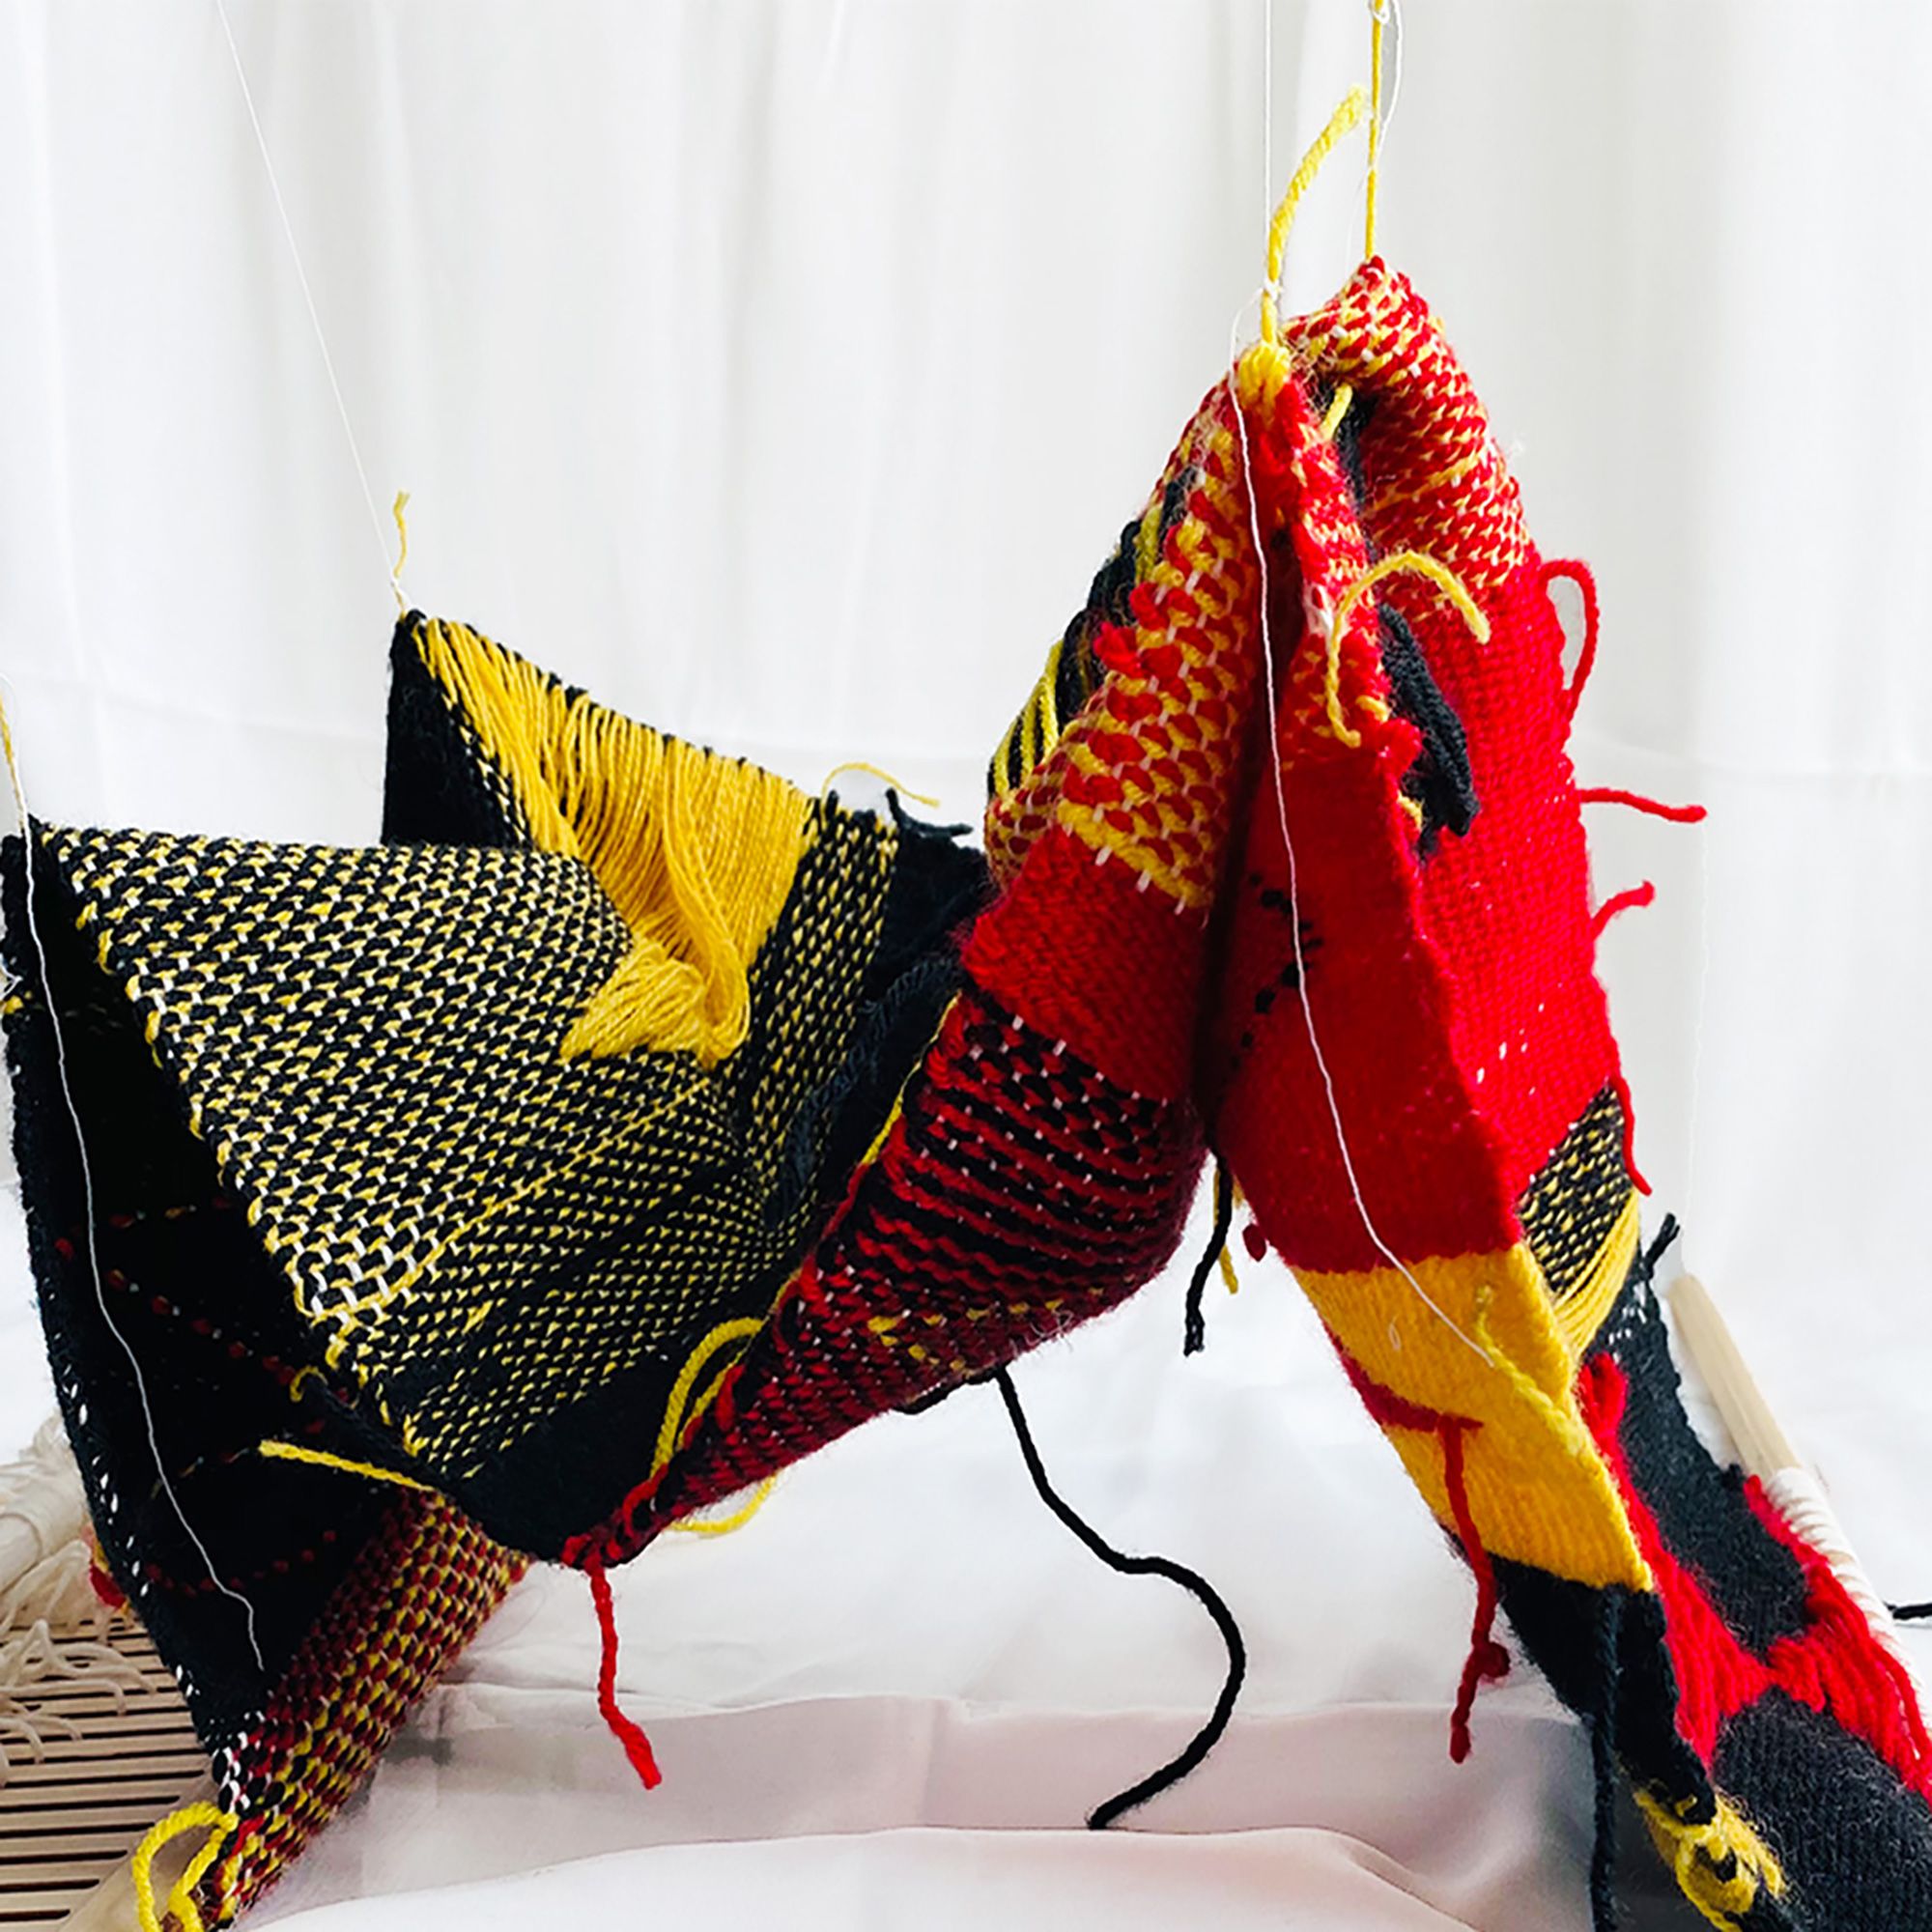 Woven fabric draped from the ceiling, including red, yellow, and black coloured wool